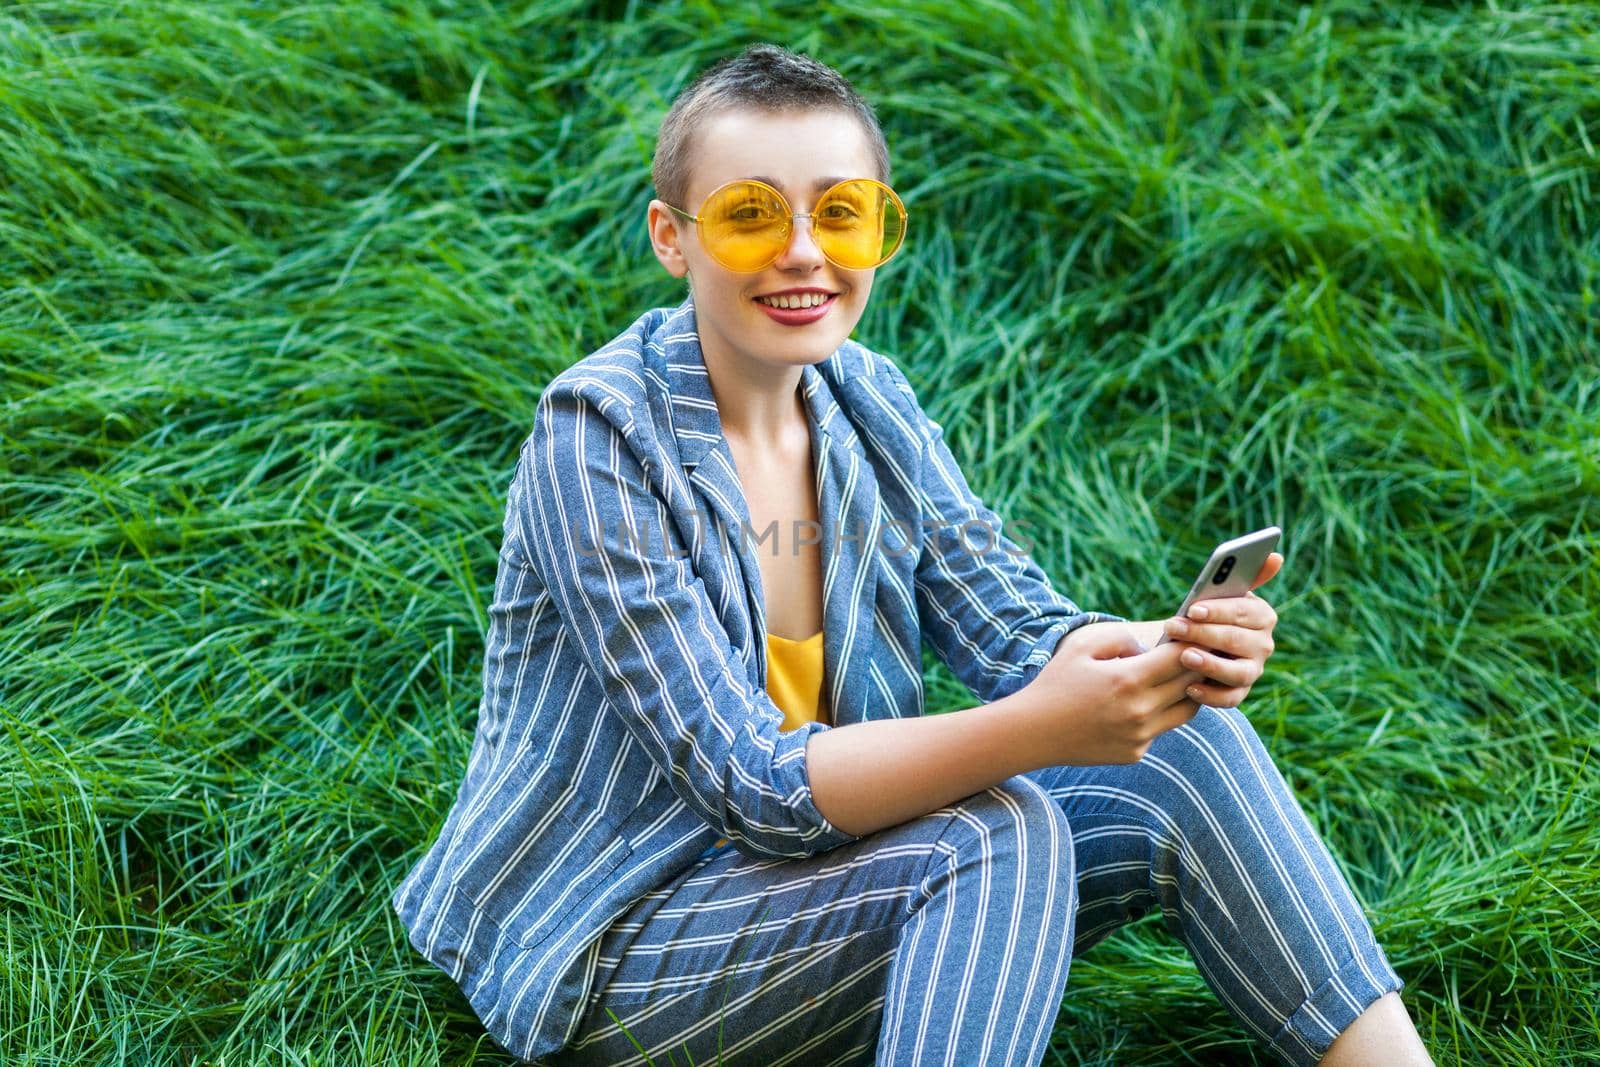 Portrait of pretty young short hair woman in casual blue striped suit, yellow glasses sitting on grass holding her smart phone mobile and looking at camera with toothy smile. outdoor summertime shot.